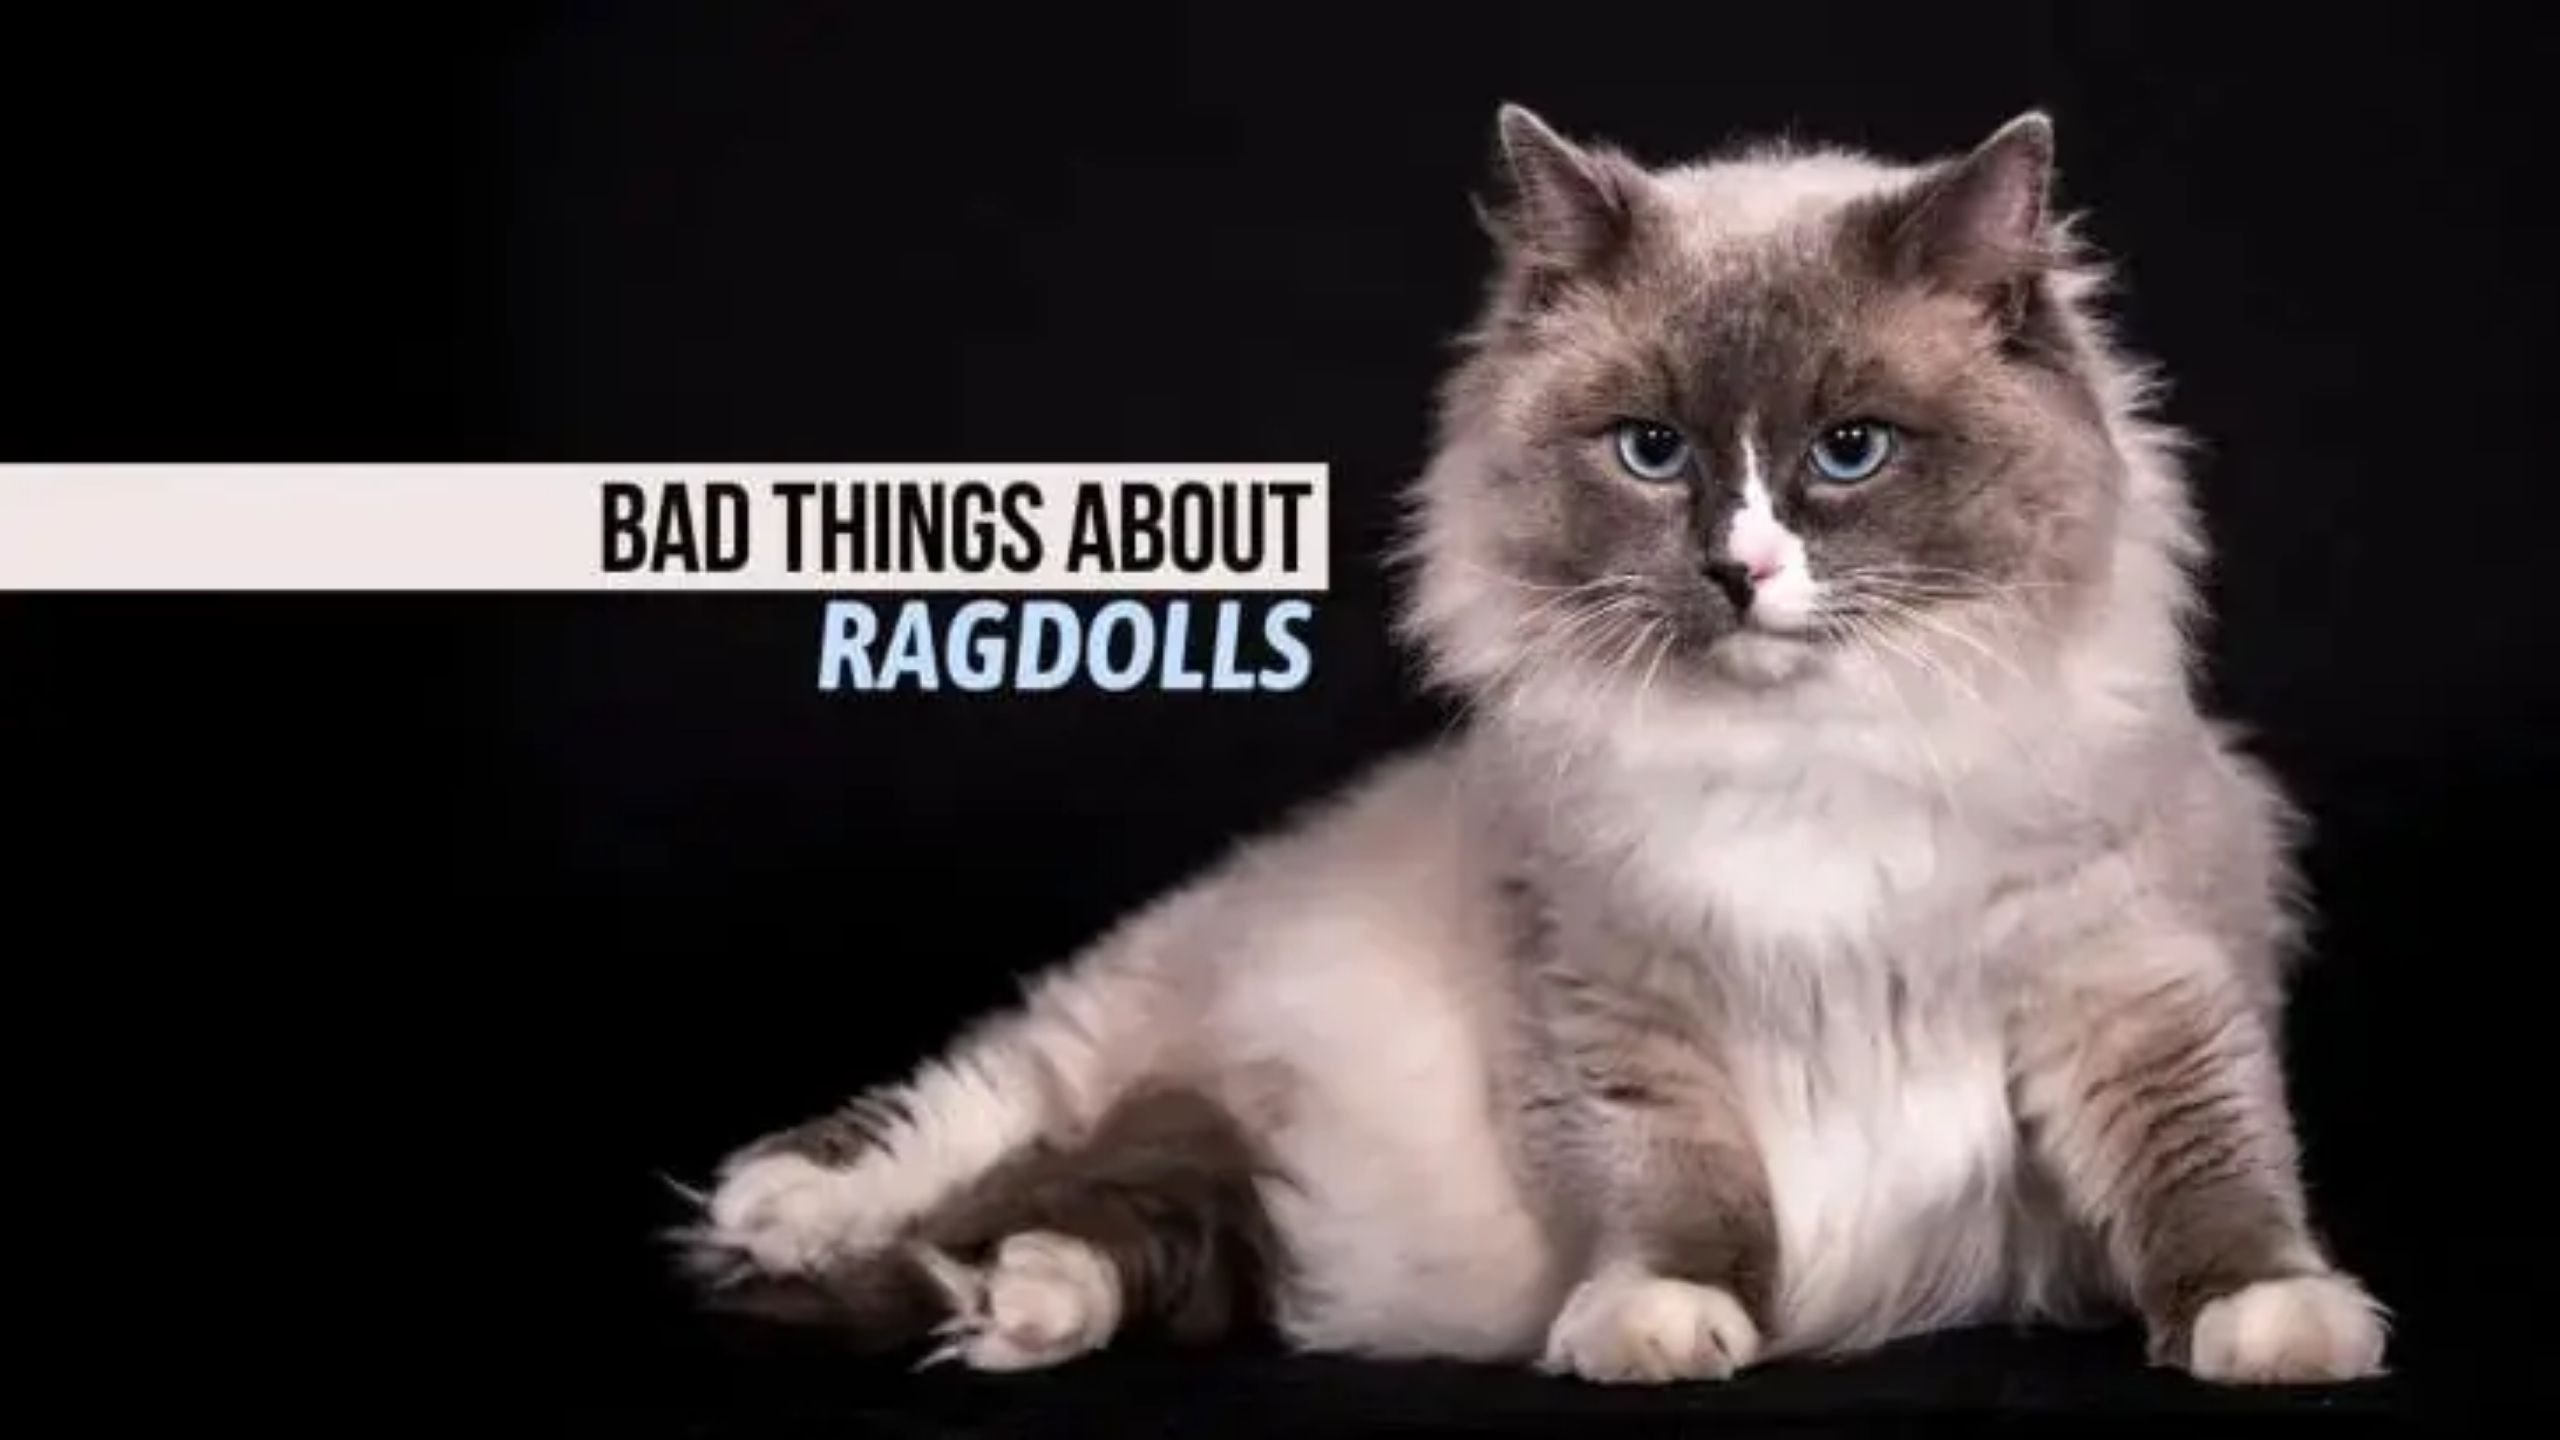 Bad Things About Ragdolls